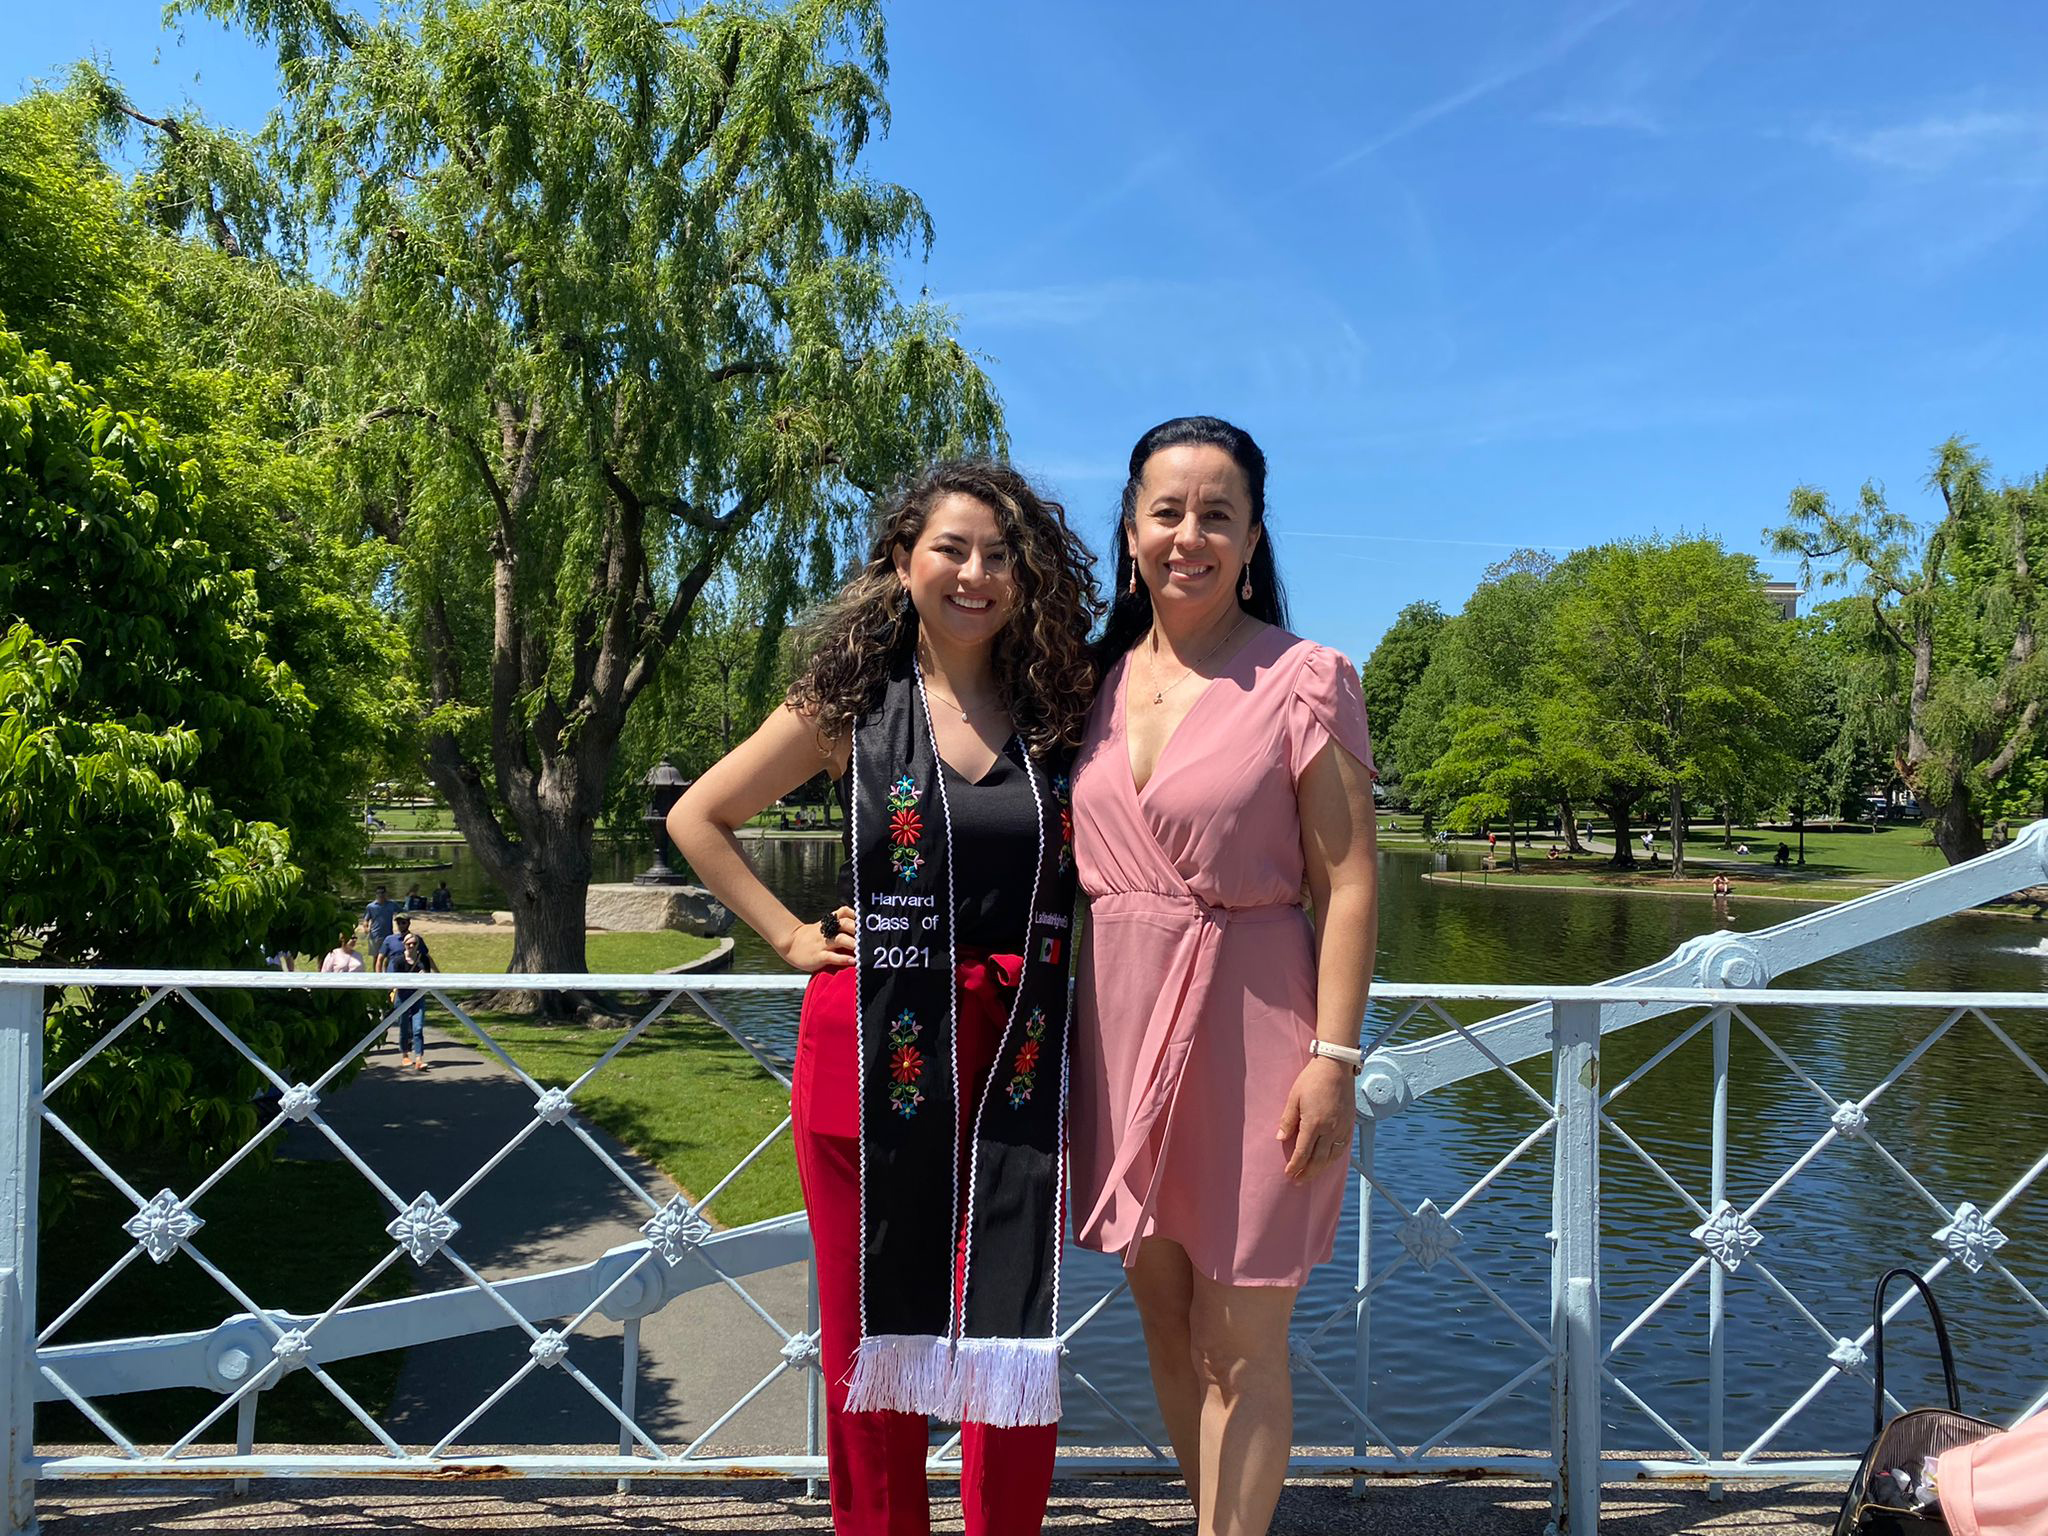 PHOTO: Nataly Morales Villa graduated from Harvard University after immigrating to the U.S. from Mexico with her mom, Veronica.